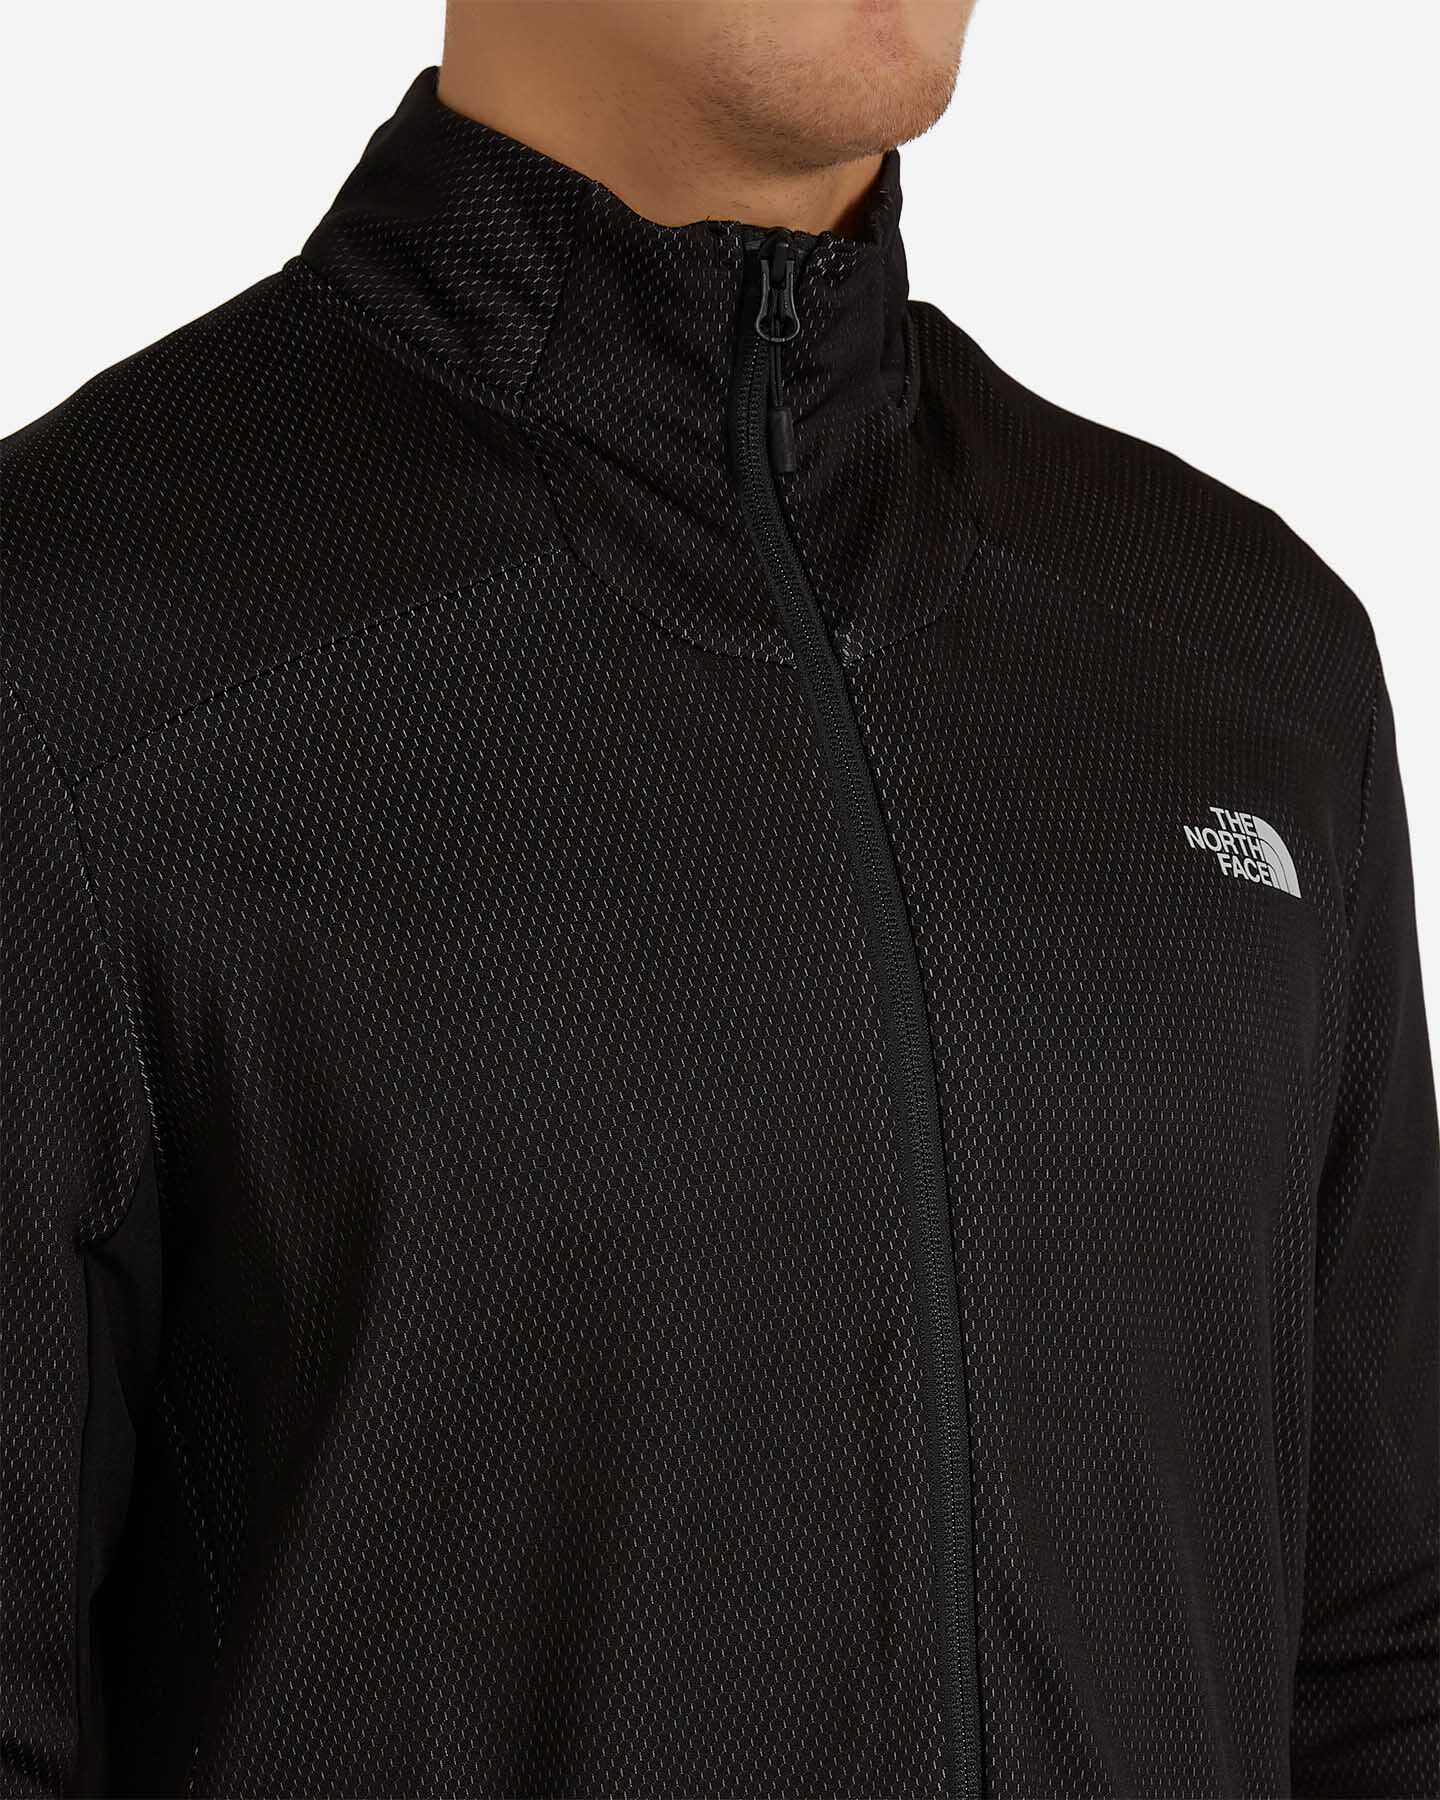  Pile THE NORTH FACE APEX MIDLAYER M S5018570|JK3|S scatto 4